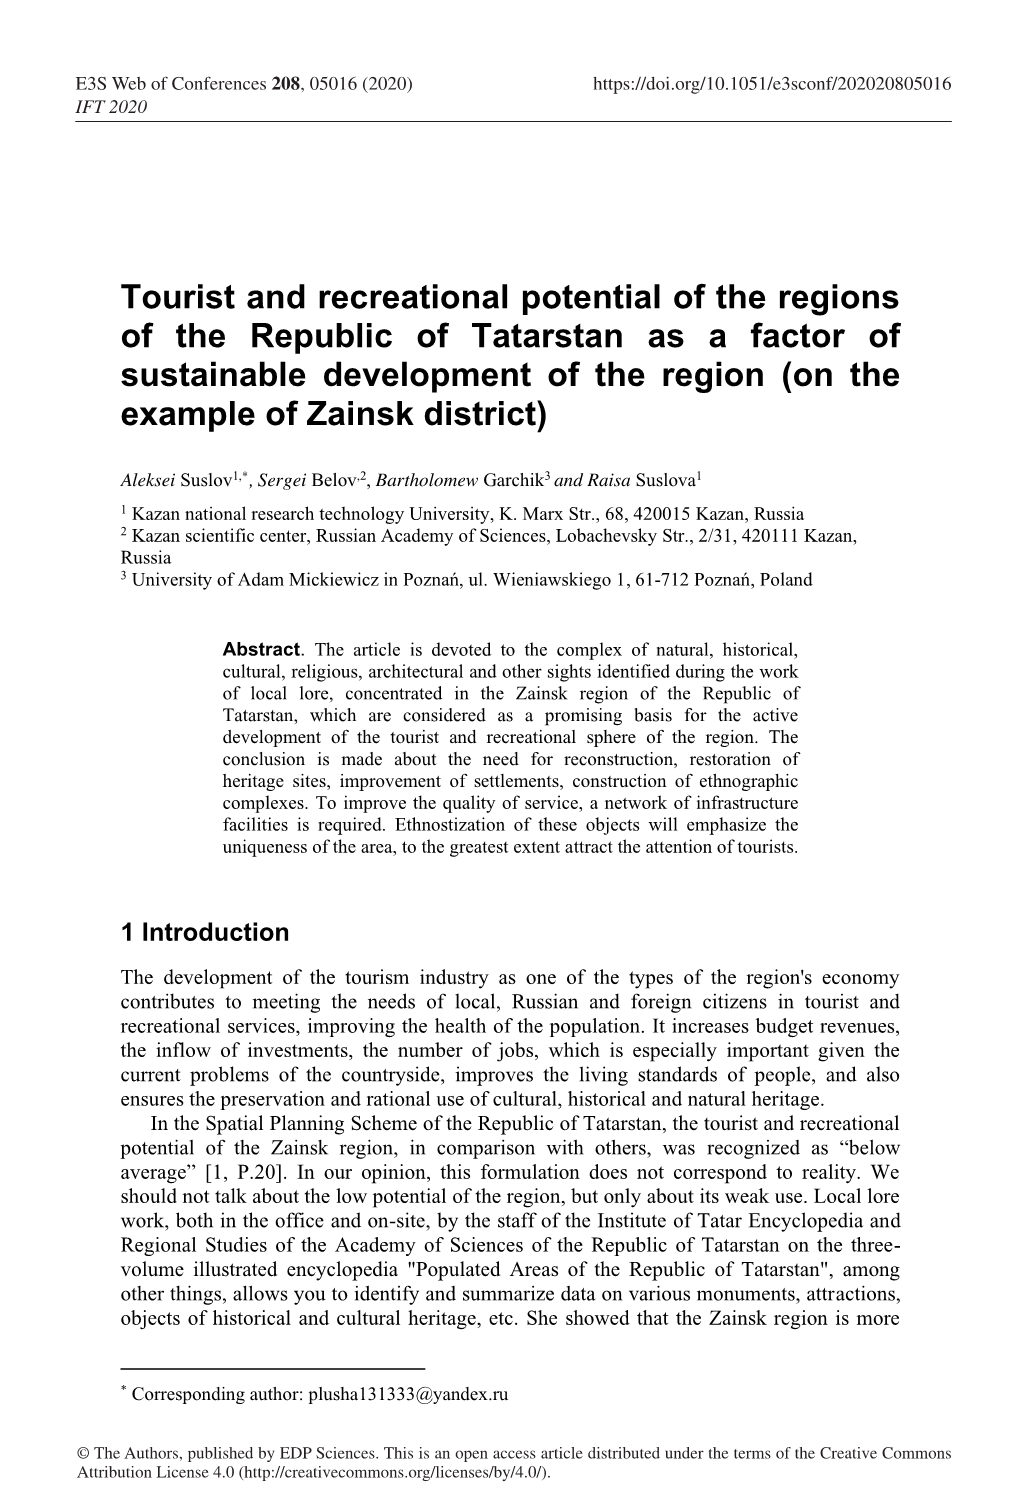 Tourist and Recreational Potential of the Regions of the Republic Of